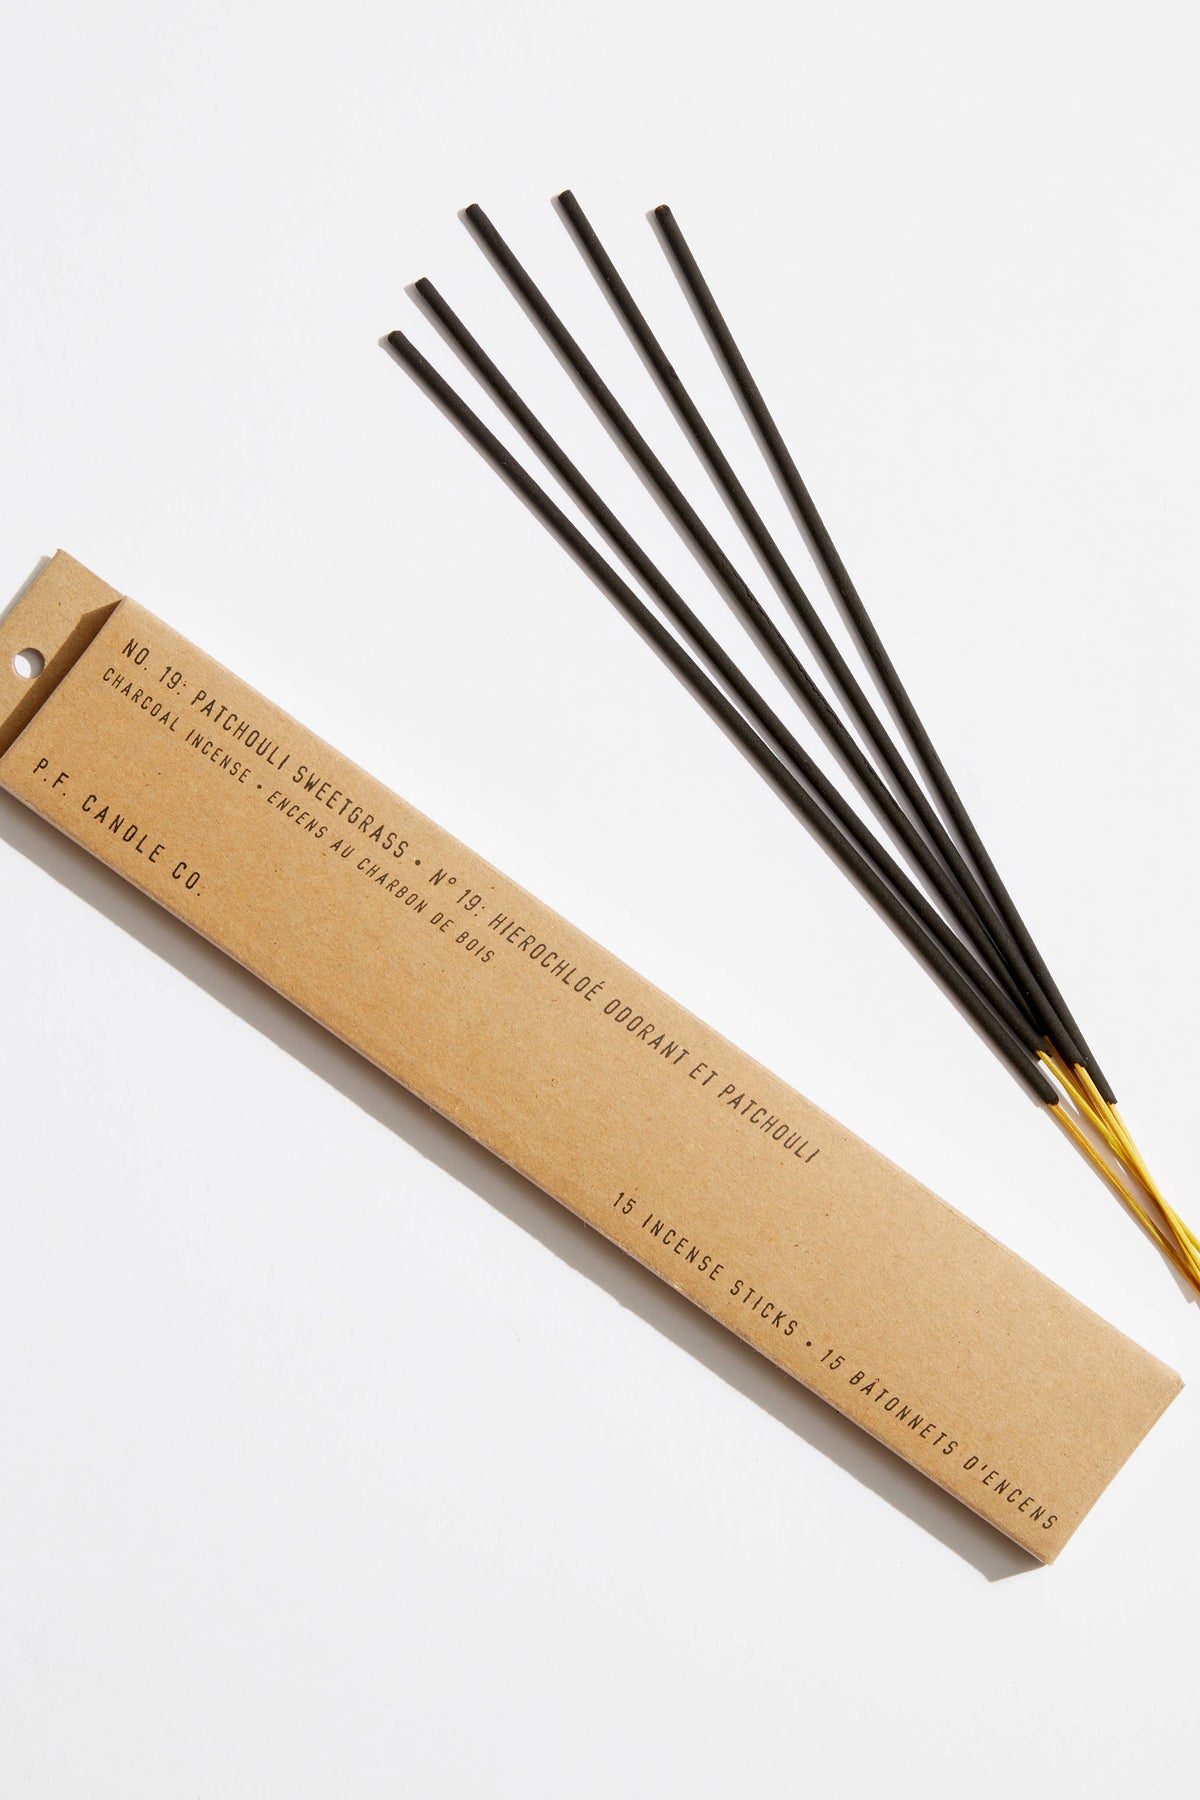 Incense | Patchouli Sweetgrass